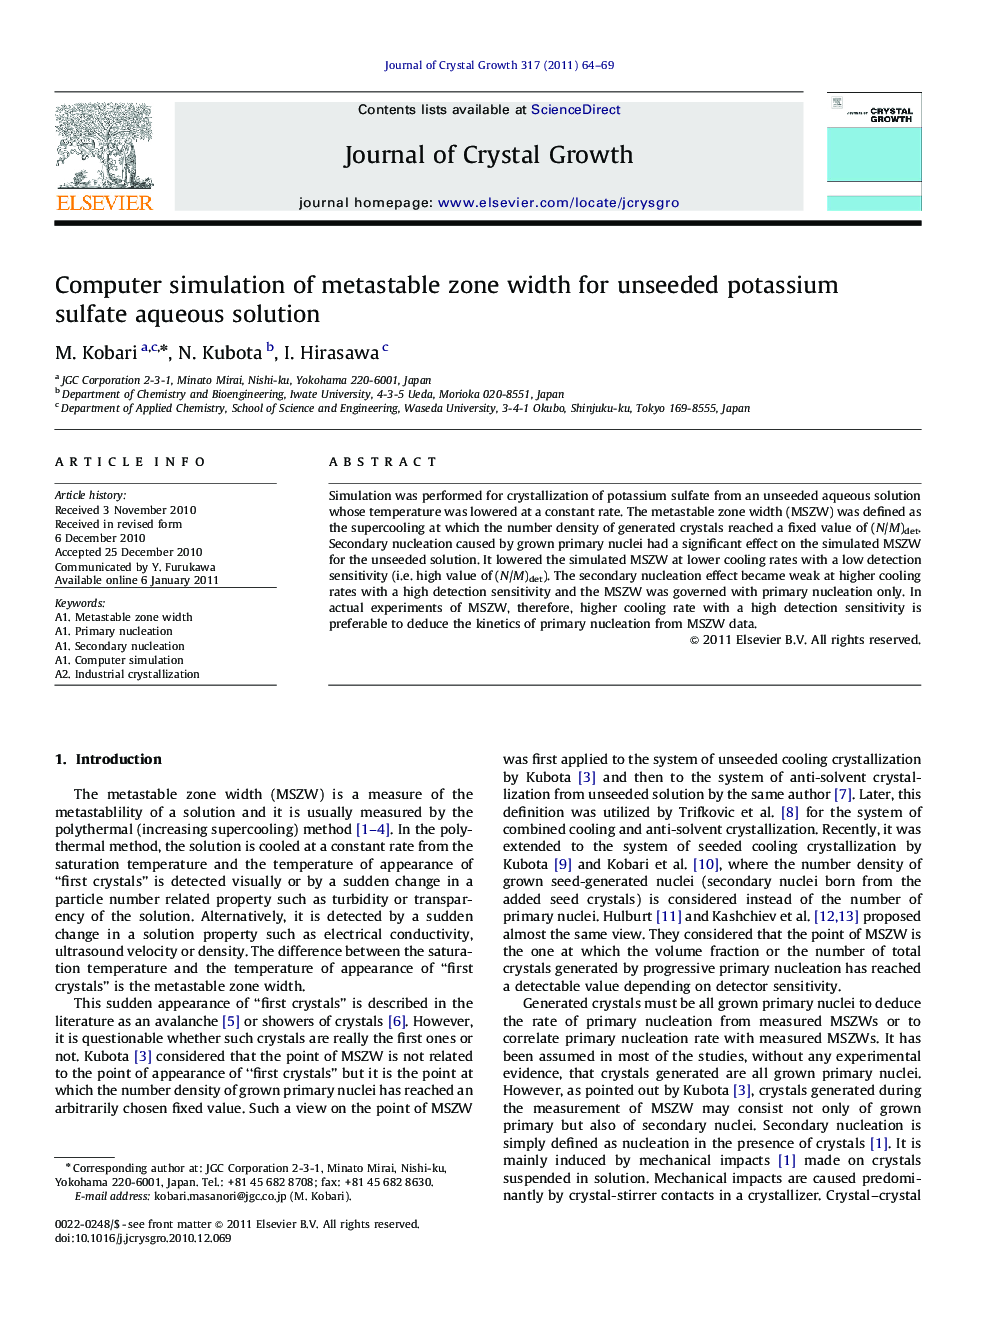 Computer simulation of metastable zone width for unseeded potassium sulfate aqueous solution